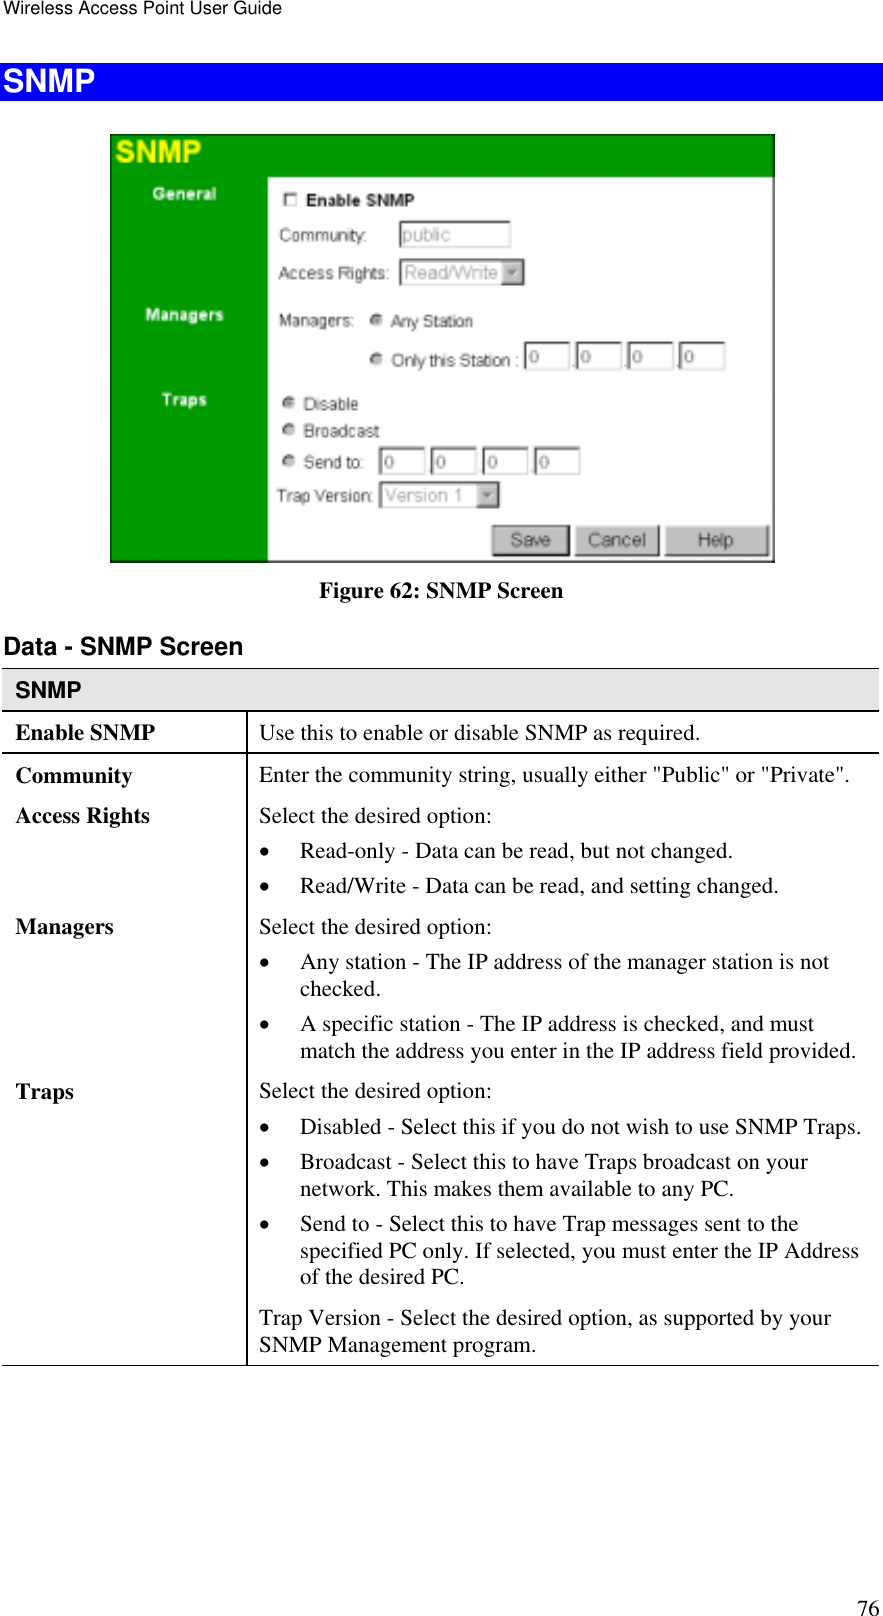 Wireless Access Point User Guide 76 SNMP  Figure 62: SNMP Screen Data - SNMP Screen SNMP Enable SNMP  Use this to enable or disable SNMP as required. Community  Enter the community string, usually either &quot;Public&quot; or &quot;Private&quot;. Access Rights  Select the desired option:  •  Read-only - Data can be read, but not changed.  •  Read/Write - Data can be read, and setting changed. Managers  Select the desired option:  •  Any station - The IP address of the manager station is not checked.  •  A specific station - The IP address is checked, and must match the address you enter in the IP address field provided. Traps  Select the desired option:  •  Disabled - Select this if you do not wish to use SNMP Traps. •  Broadcast - Select this to have Traps broadcast on your network. This makes them available to any PC.  •  Send to - Select this to have Trap messages sent to the specified PC only. If selected, you must enter the IP Address of the desired PC.  Trap Version - Select the desired option, as supported by your SNMP Management program. 